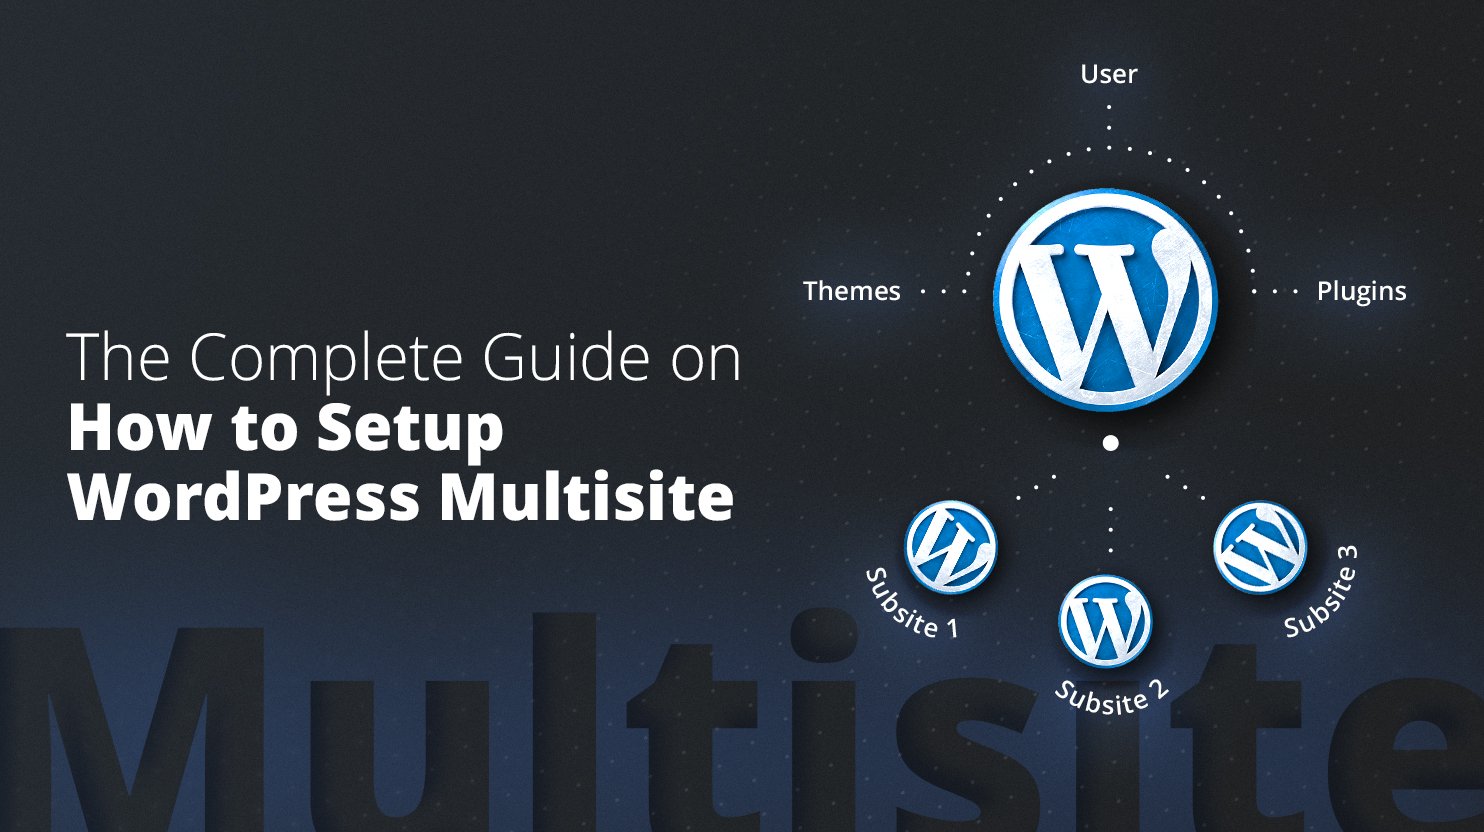 The Complete Guide on How to Setup WordPress Multisite